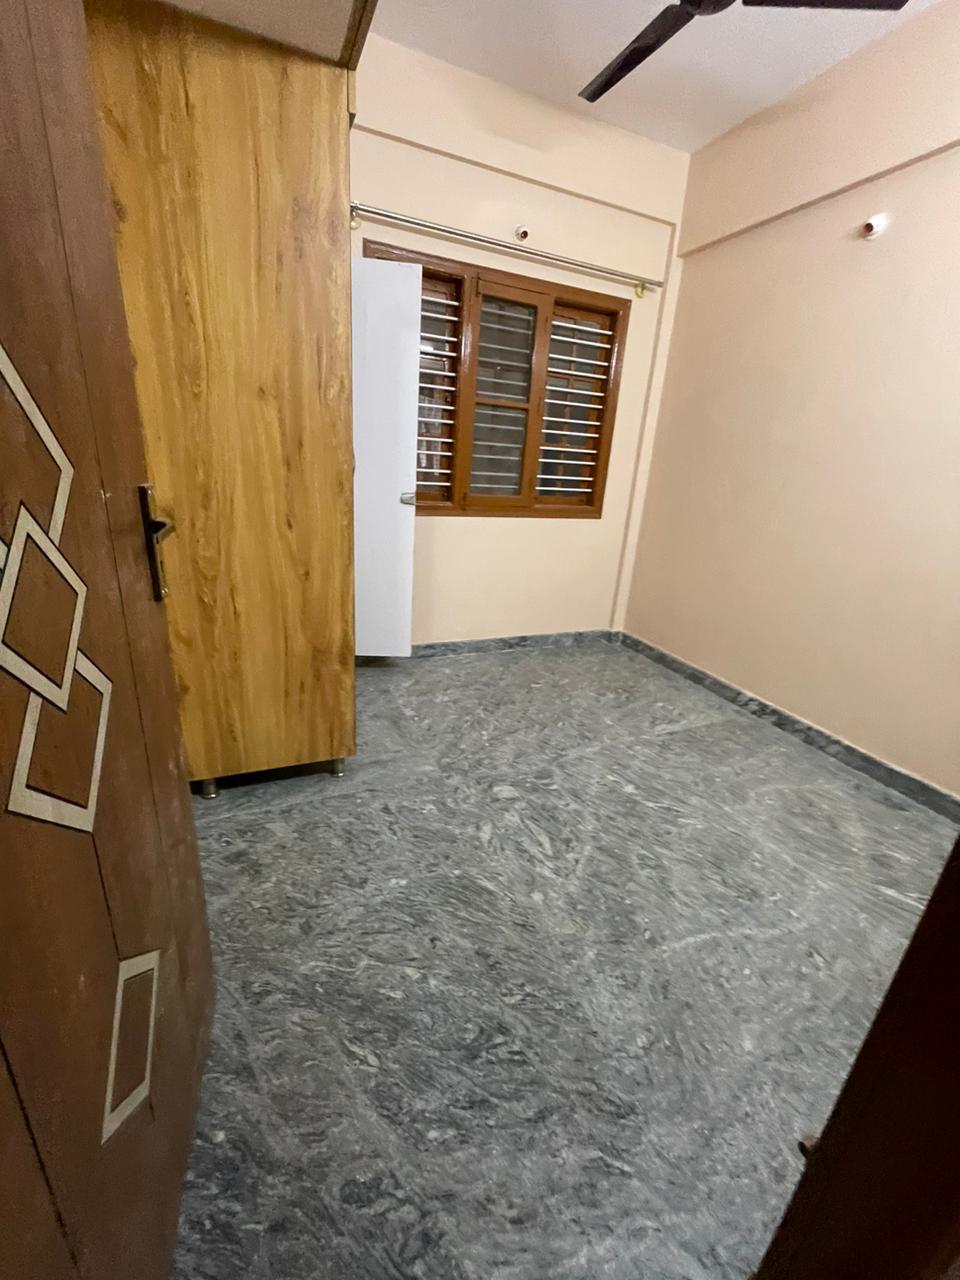 3 BHK Independent House for Lease Only at JAML2 - 4541 in Indira Nagar